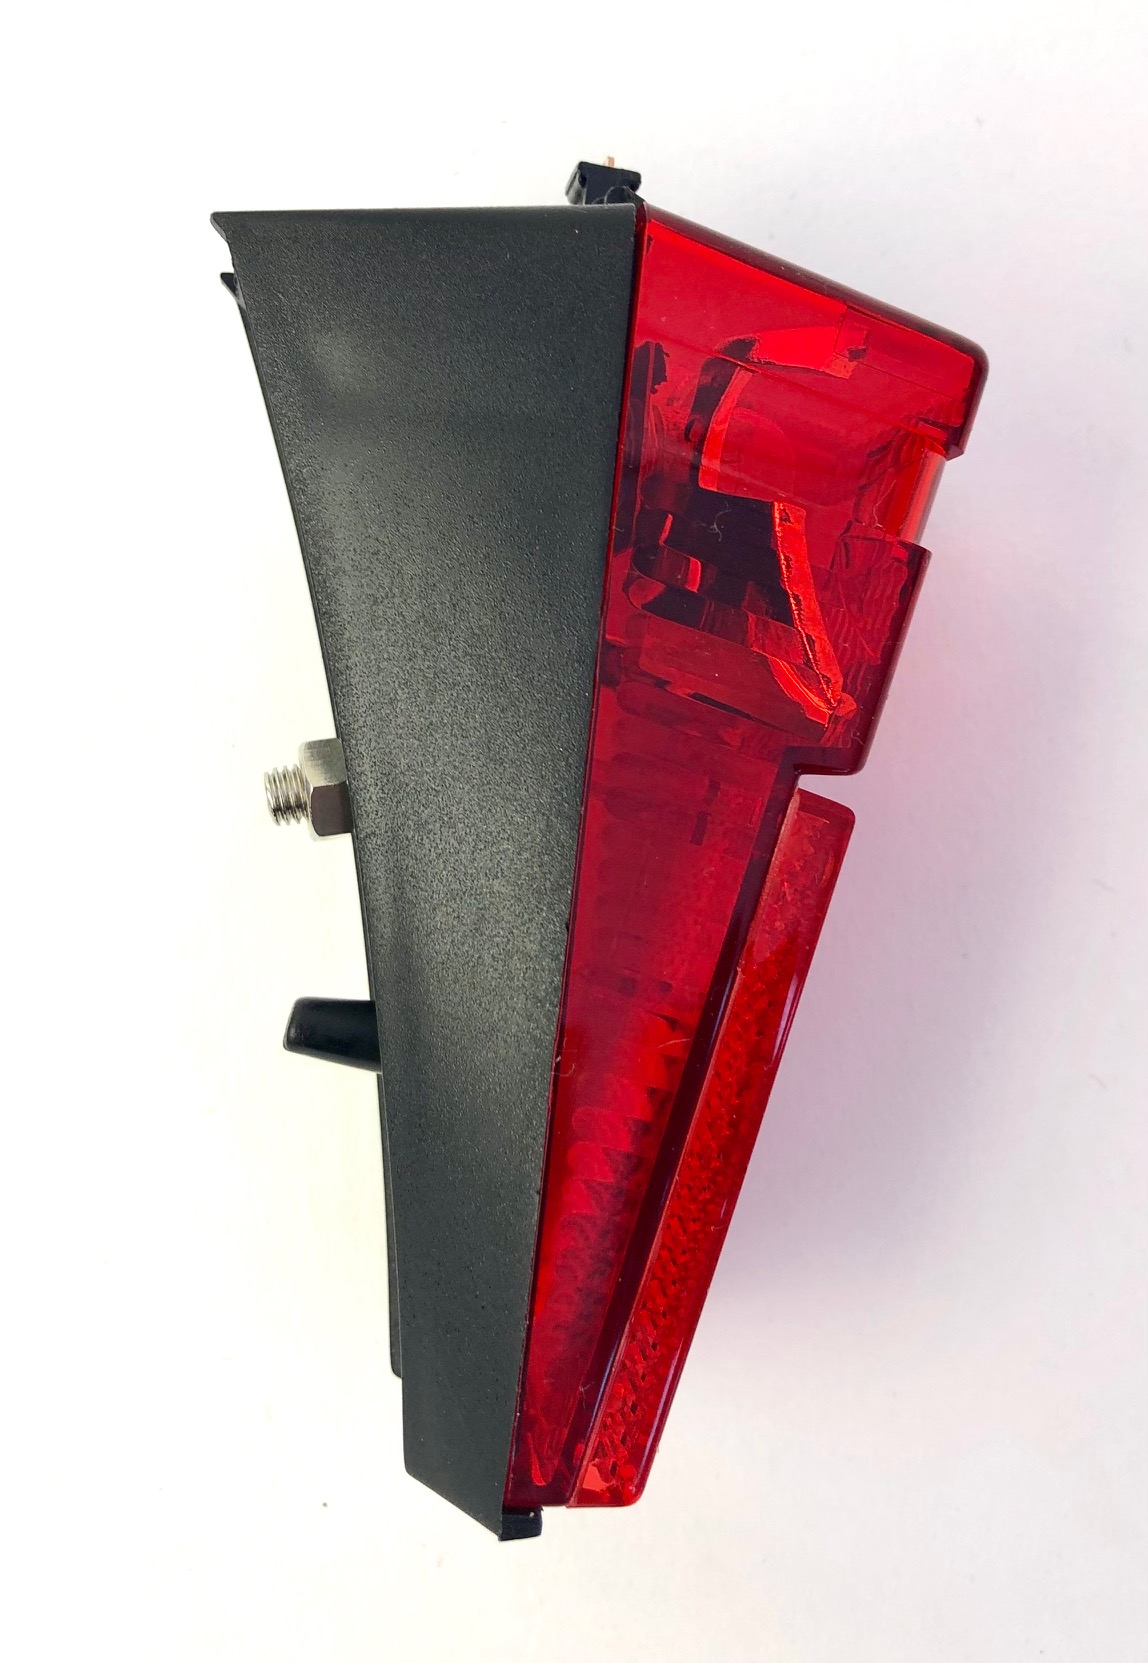 Rear lamp for dynamo to assemble on fender